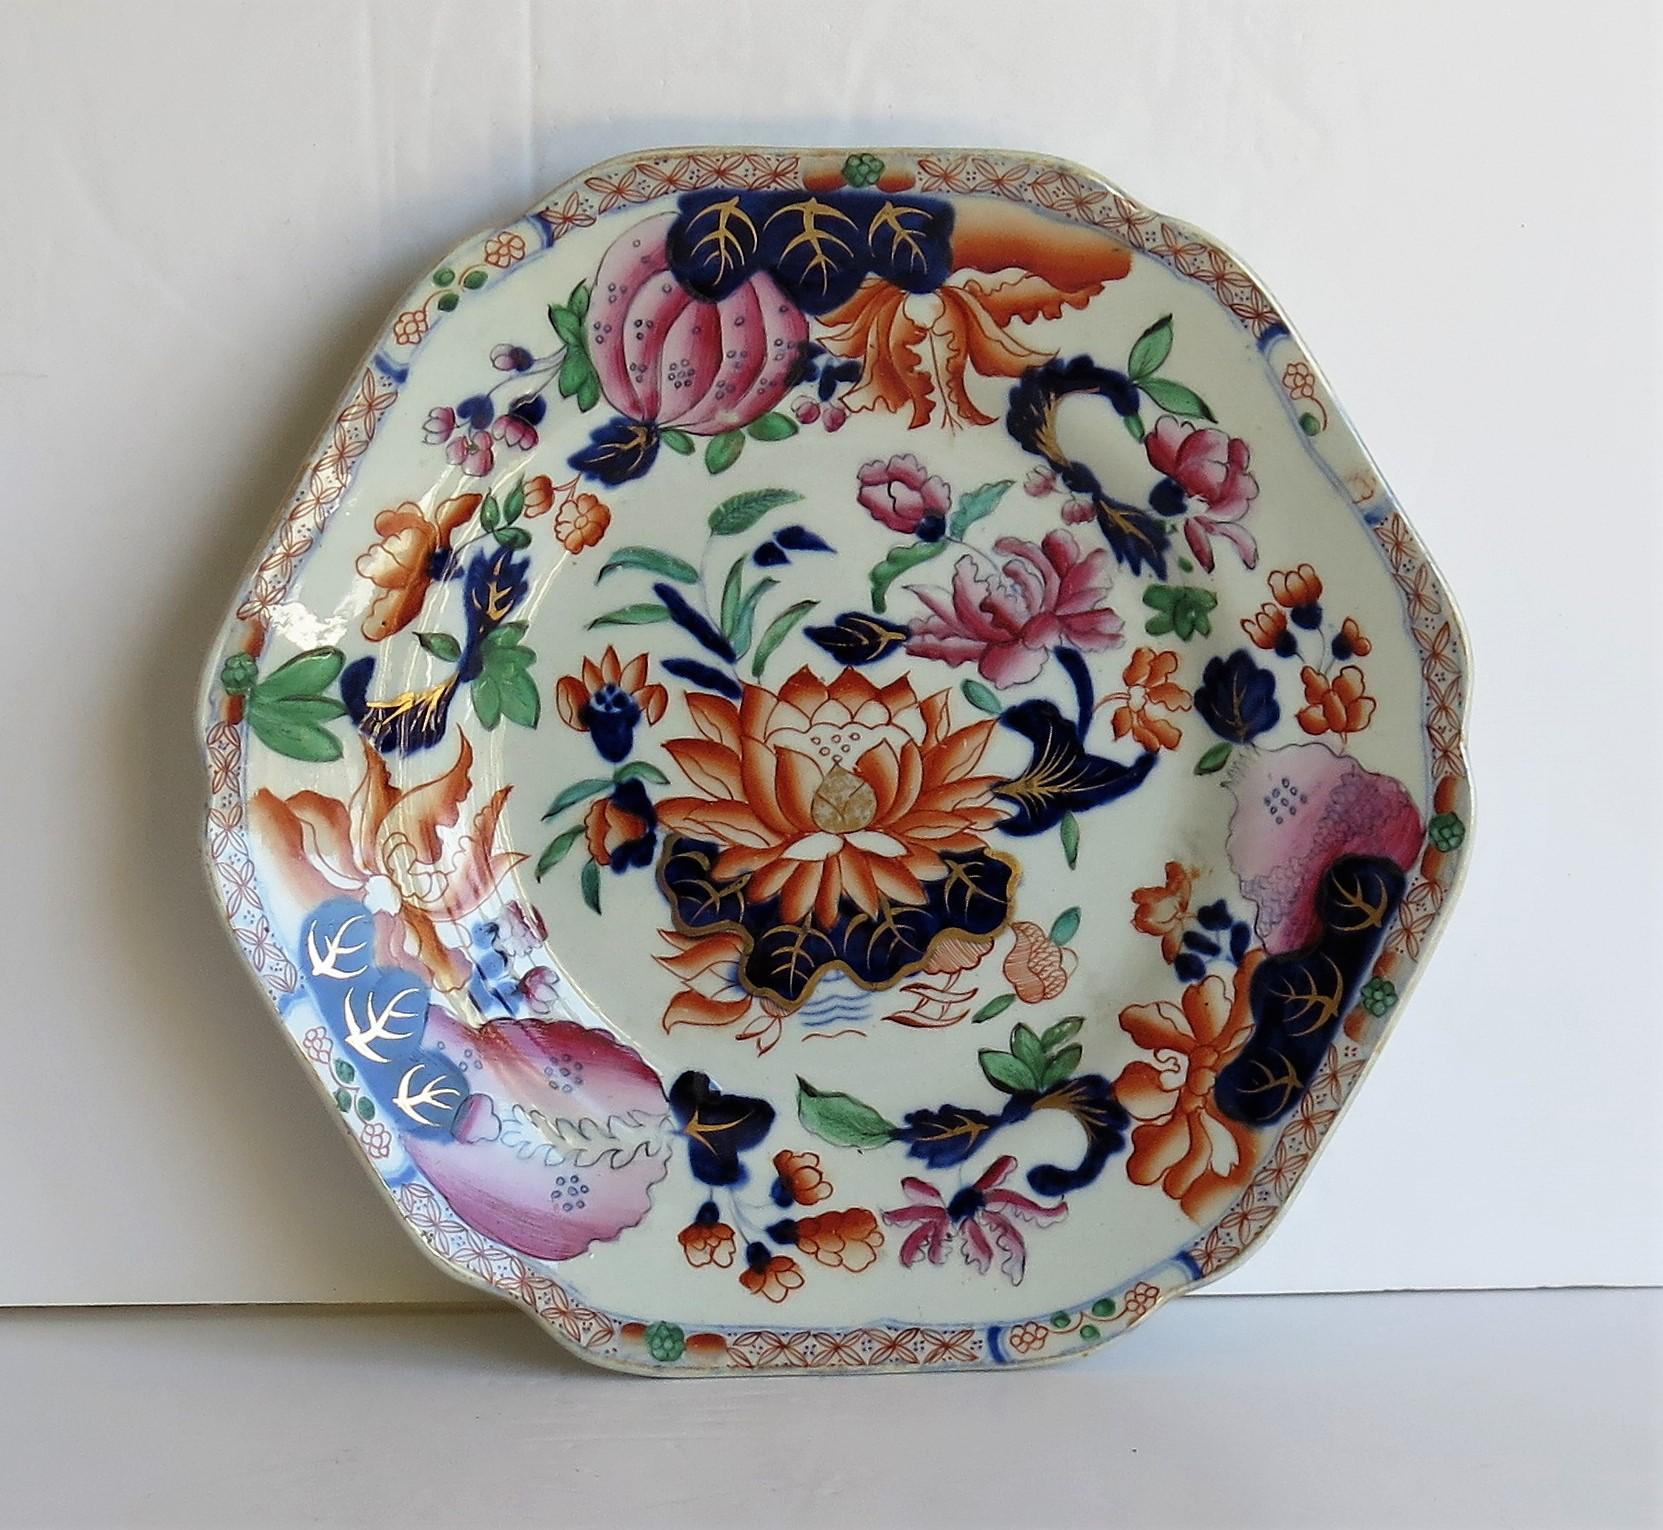 19th Century Early Hicks and Meigh Ironstone Plate or Dish in Water Lily Ptn No.5, circa 1815